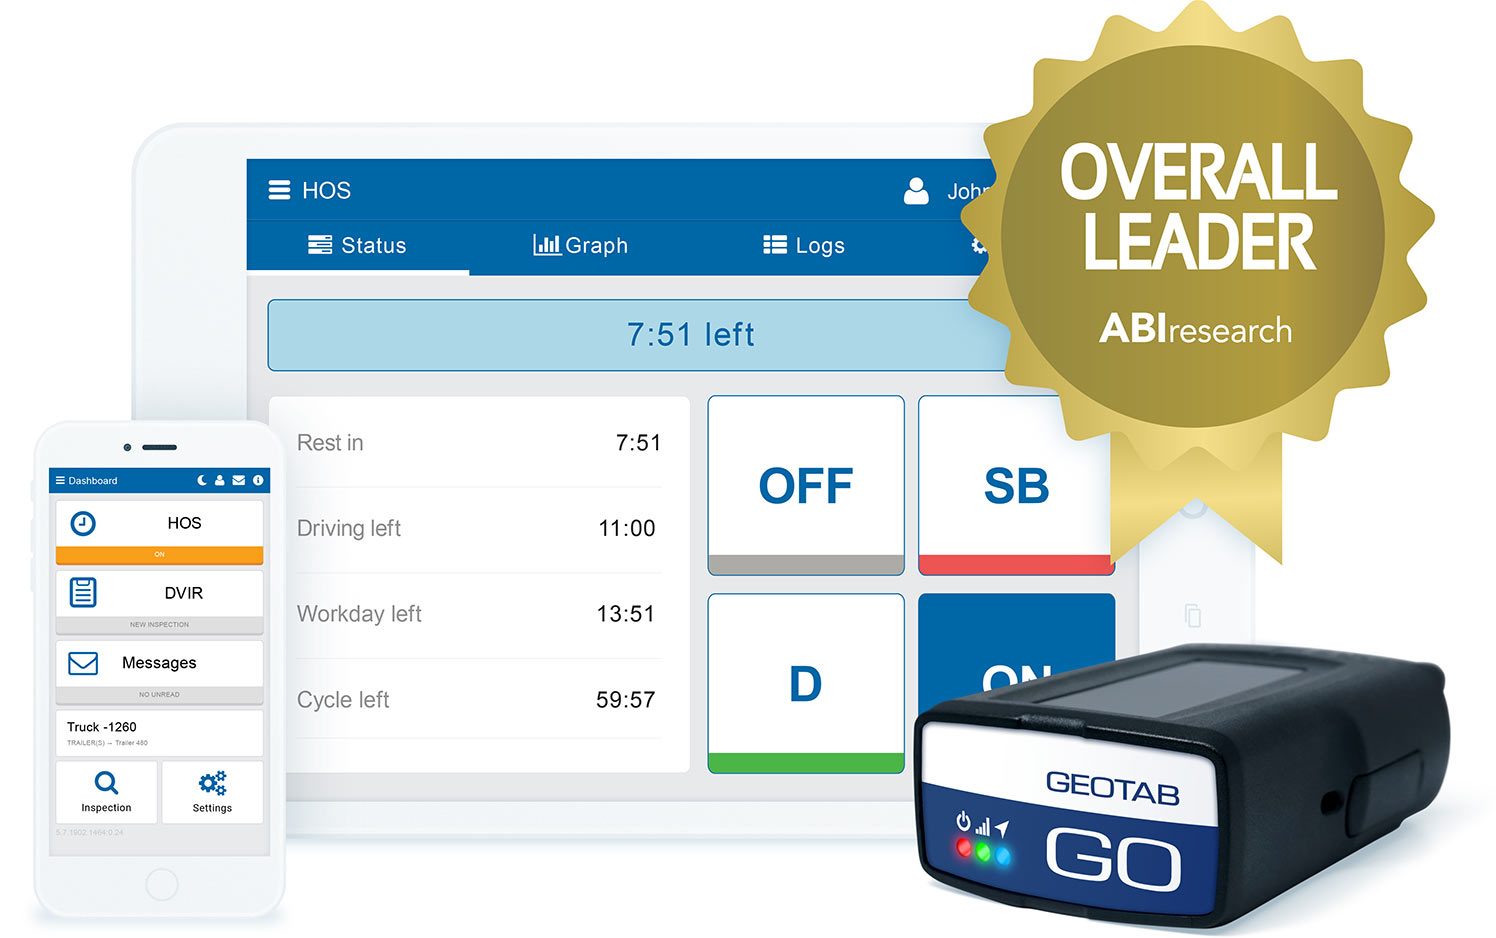 Geotab Drive app on mobile devices, a GO device and the ABI logo